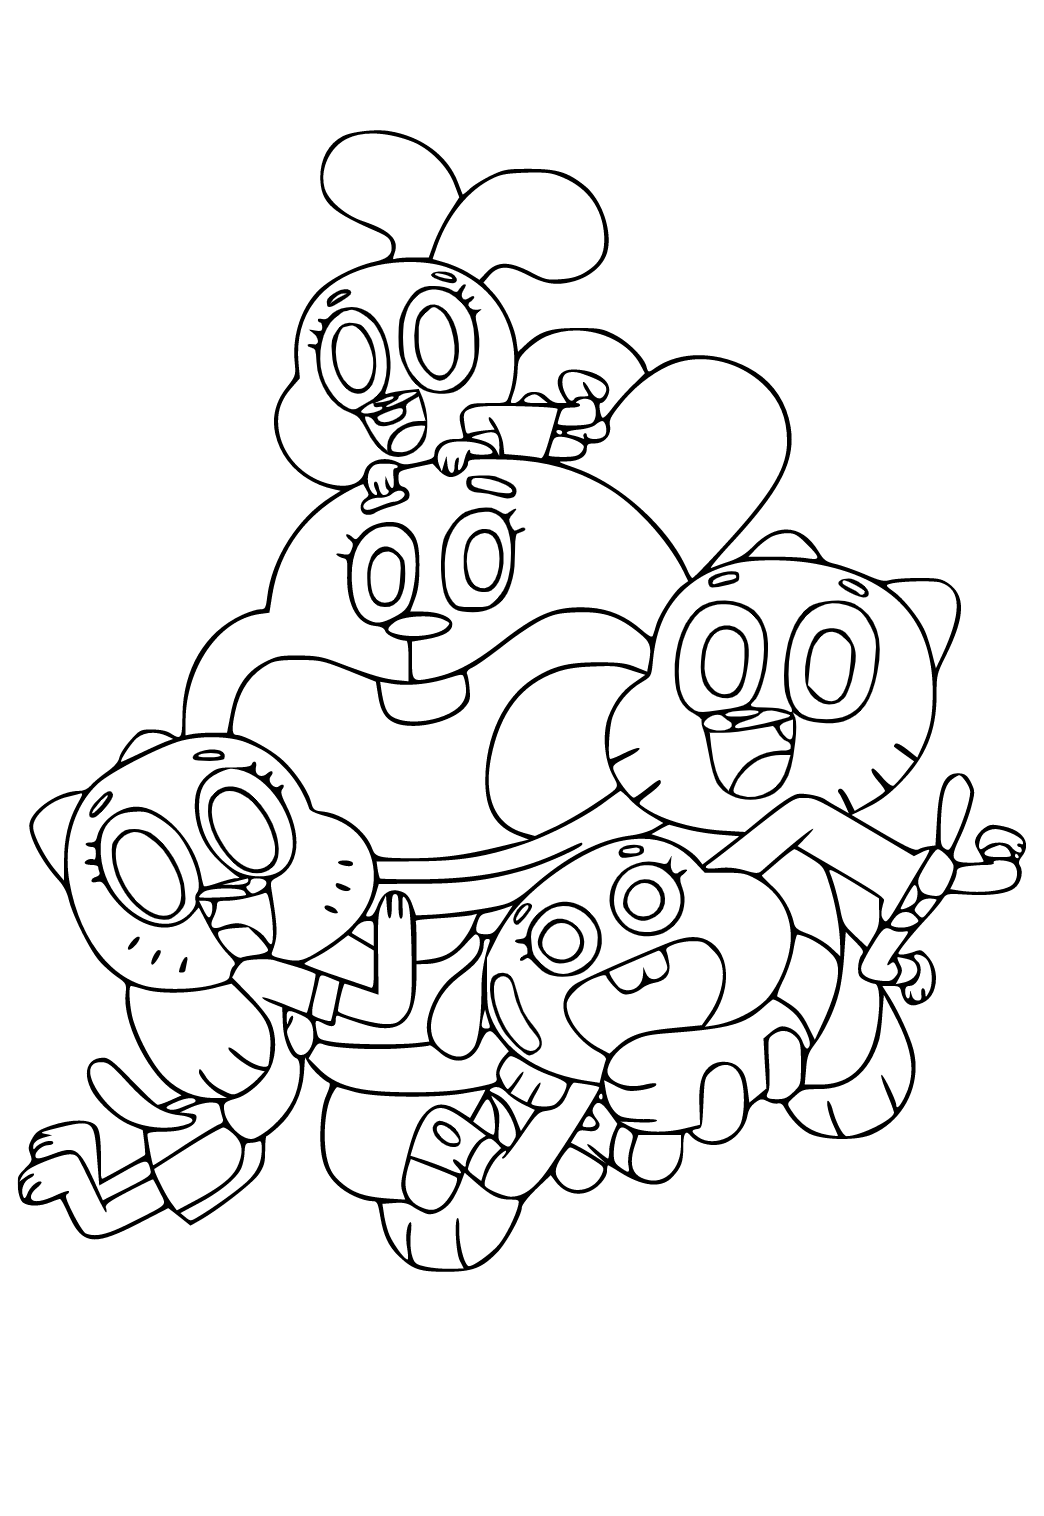 Free Printable Cartoon Characters Coloring Page, Sheet and Picture for  Adults and Kids (Girls and Boys) 